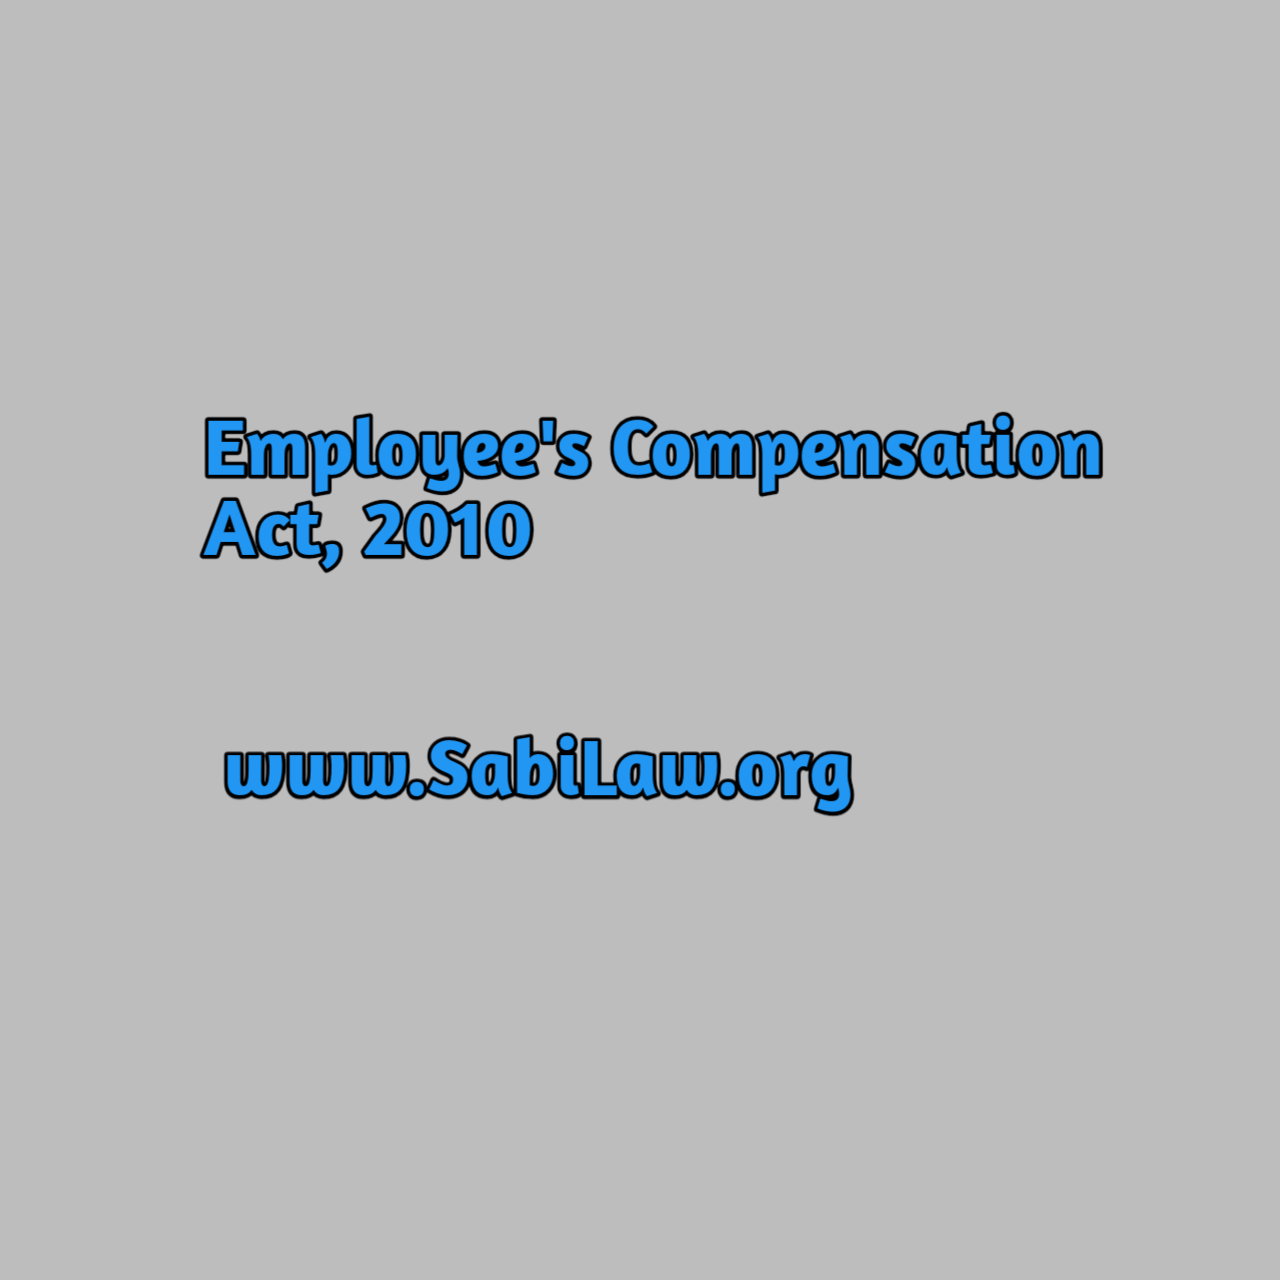 Click to download a copy of the Employee's Compensation Act, 2010.